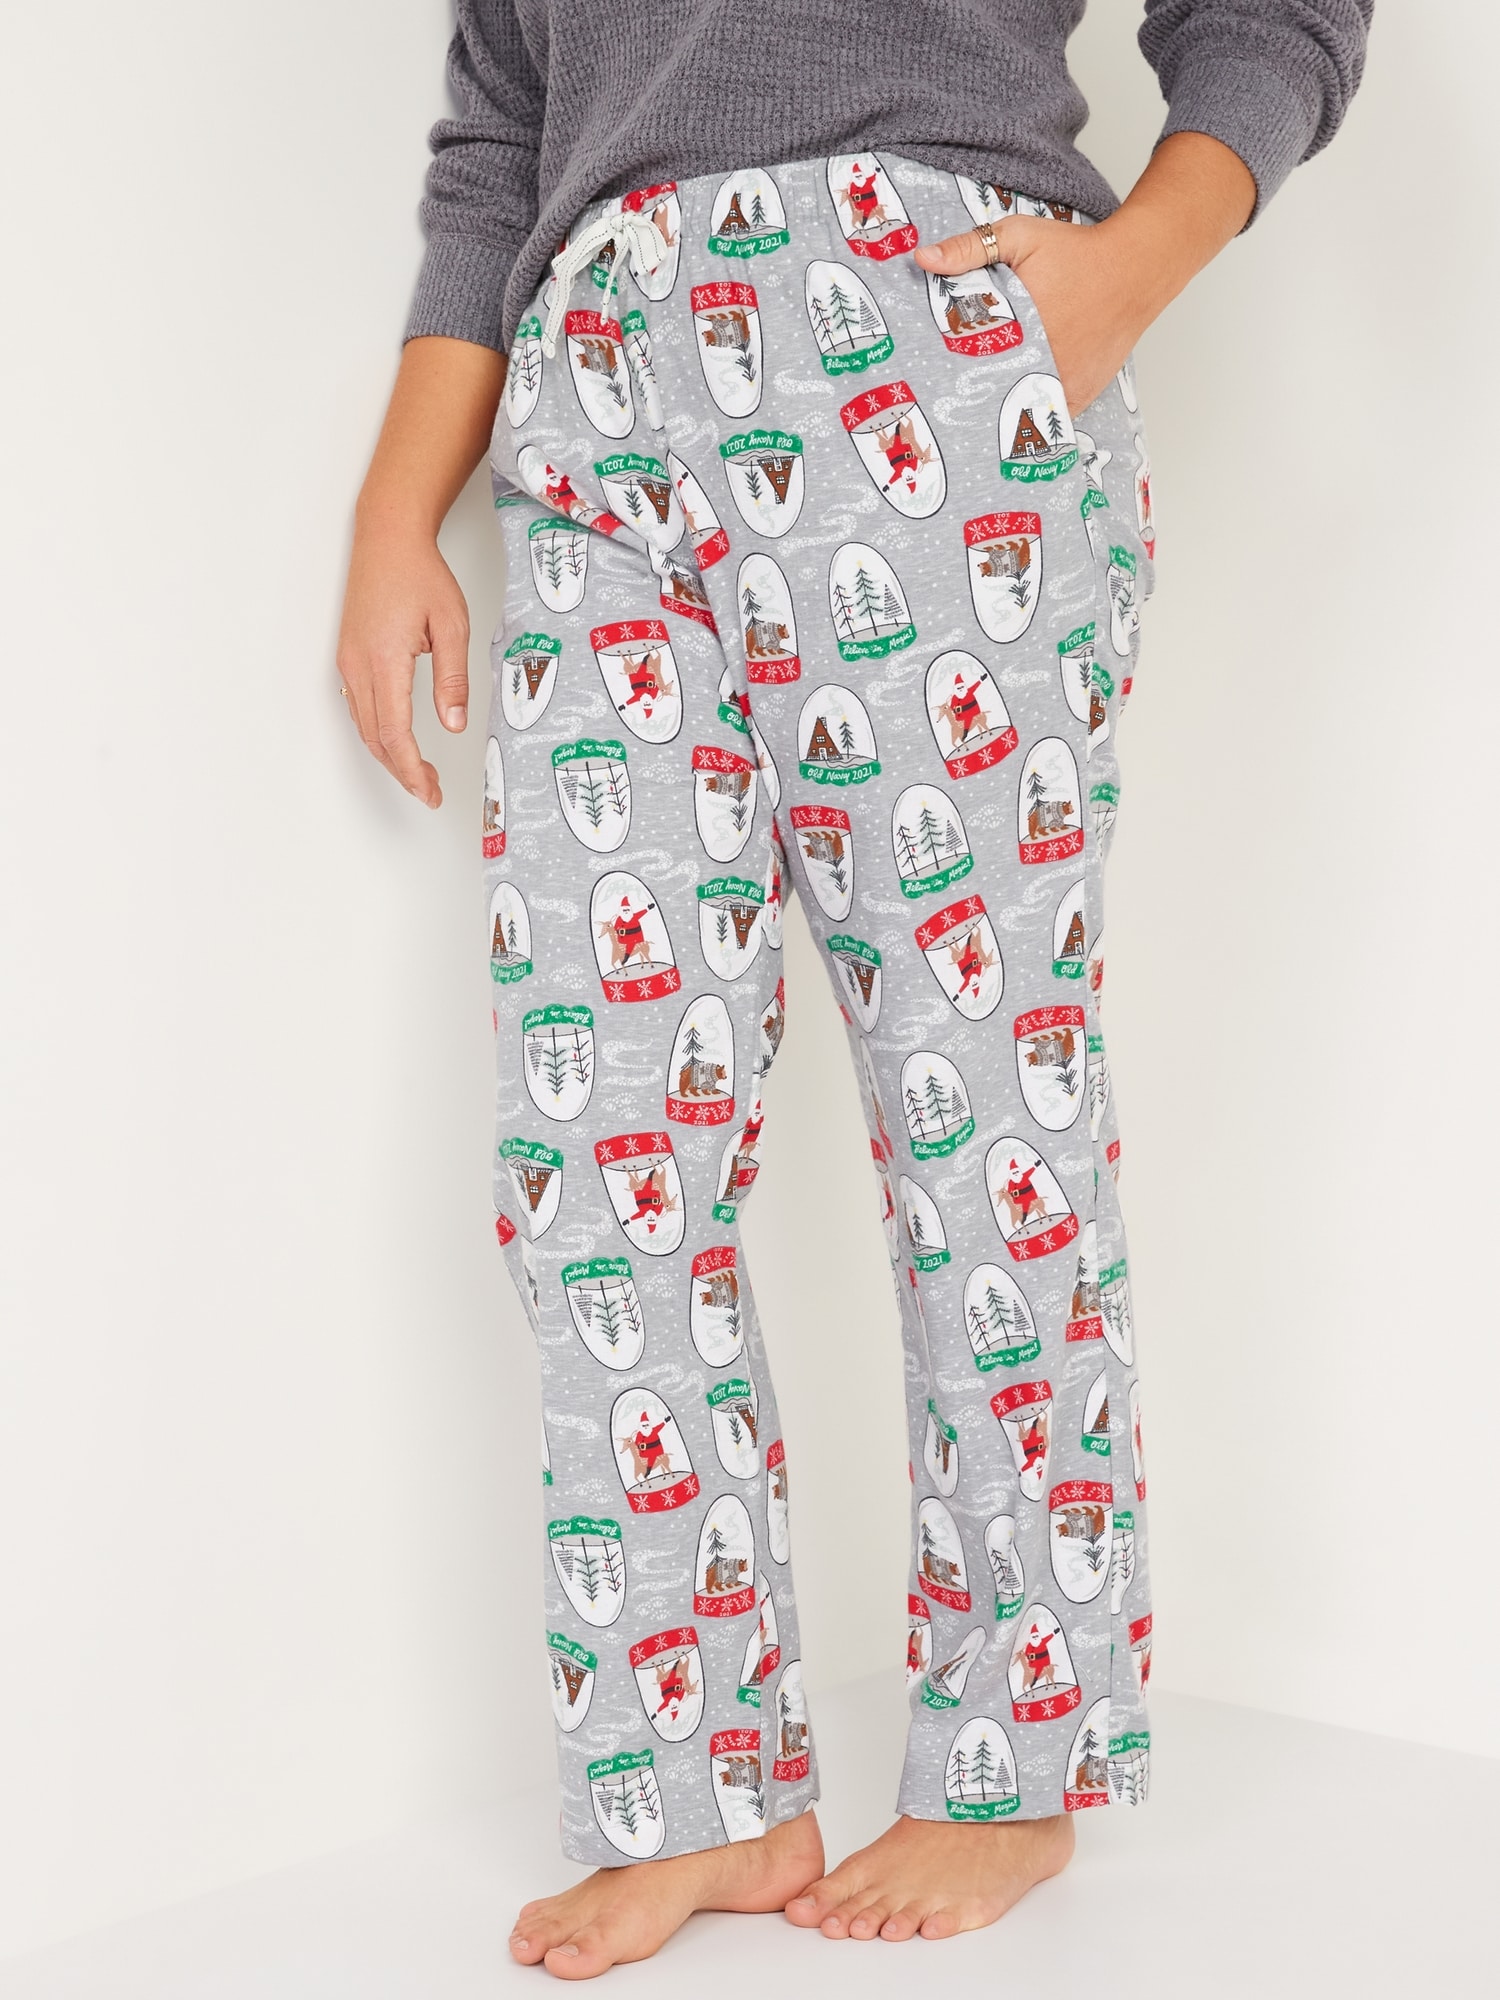 Matching Printed Flannel Pajama Pants for Women | Old Navy